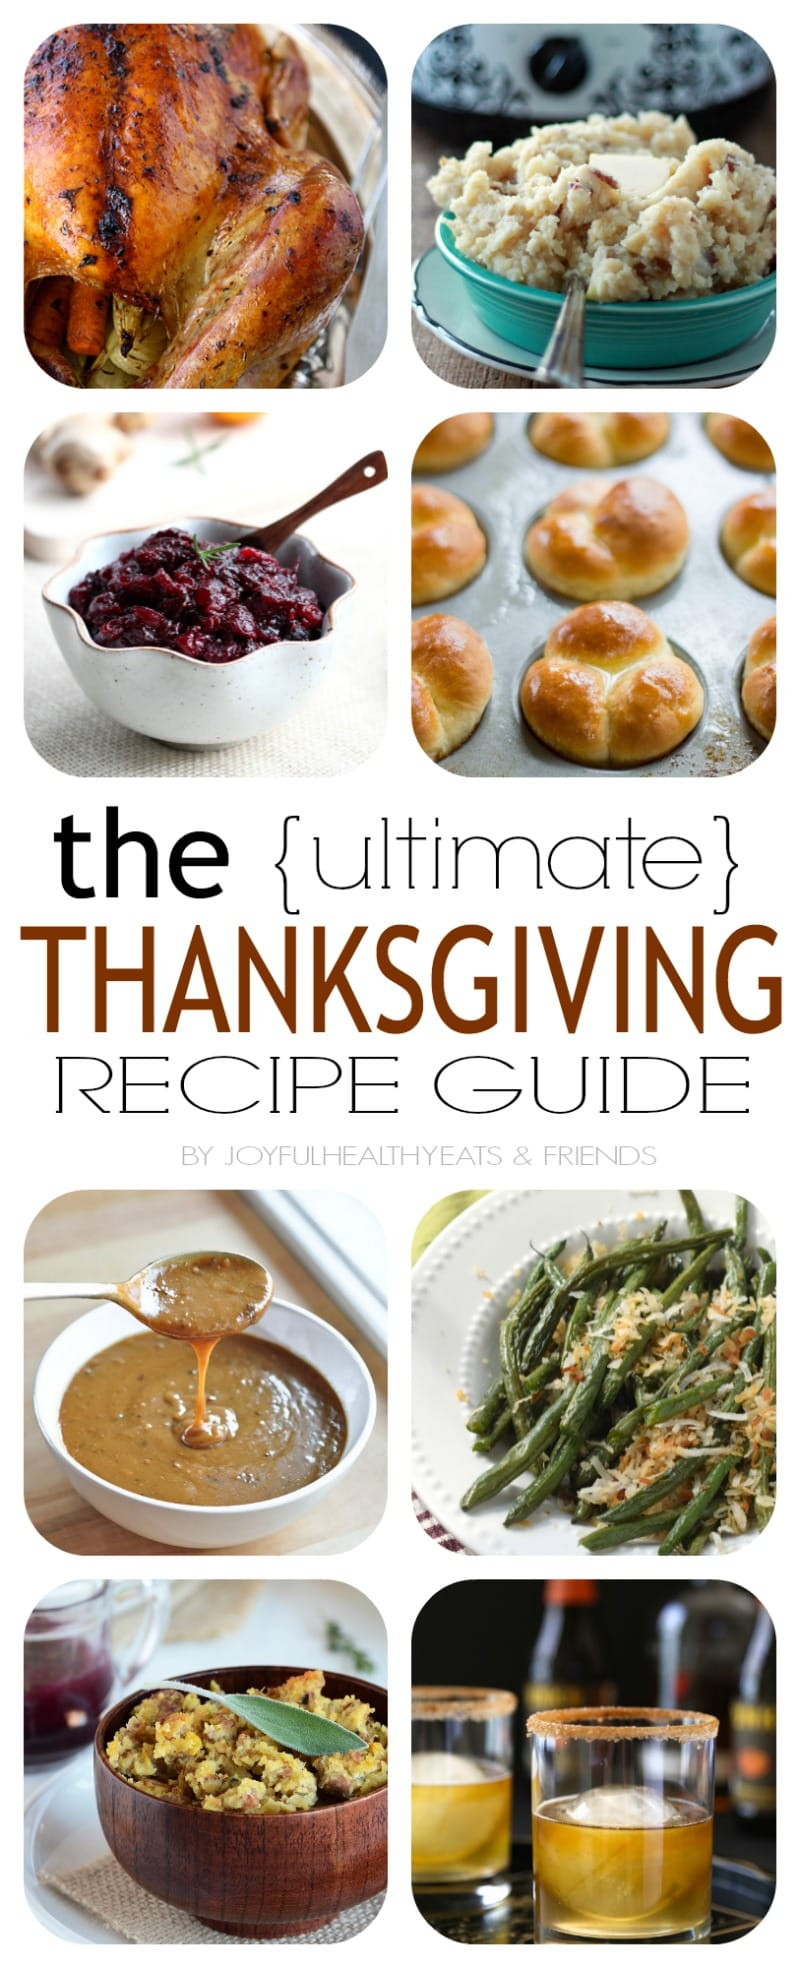 Thanksgiving Dinner Recipes
 The Ultimate Thanksgiving Recipe Guide with 39 Amazing Recipes